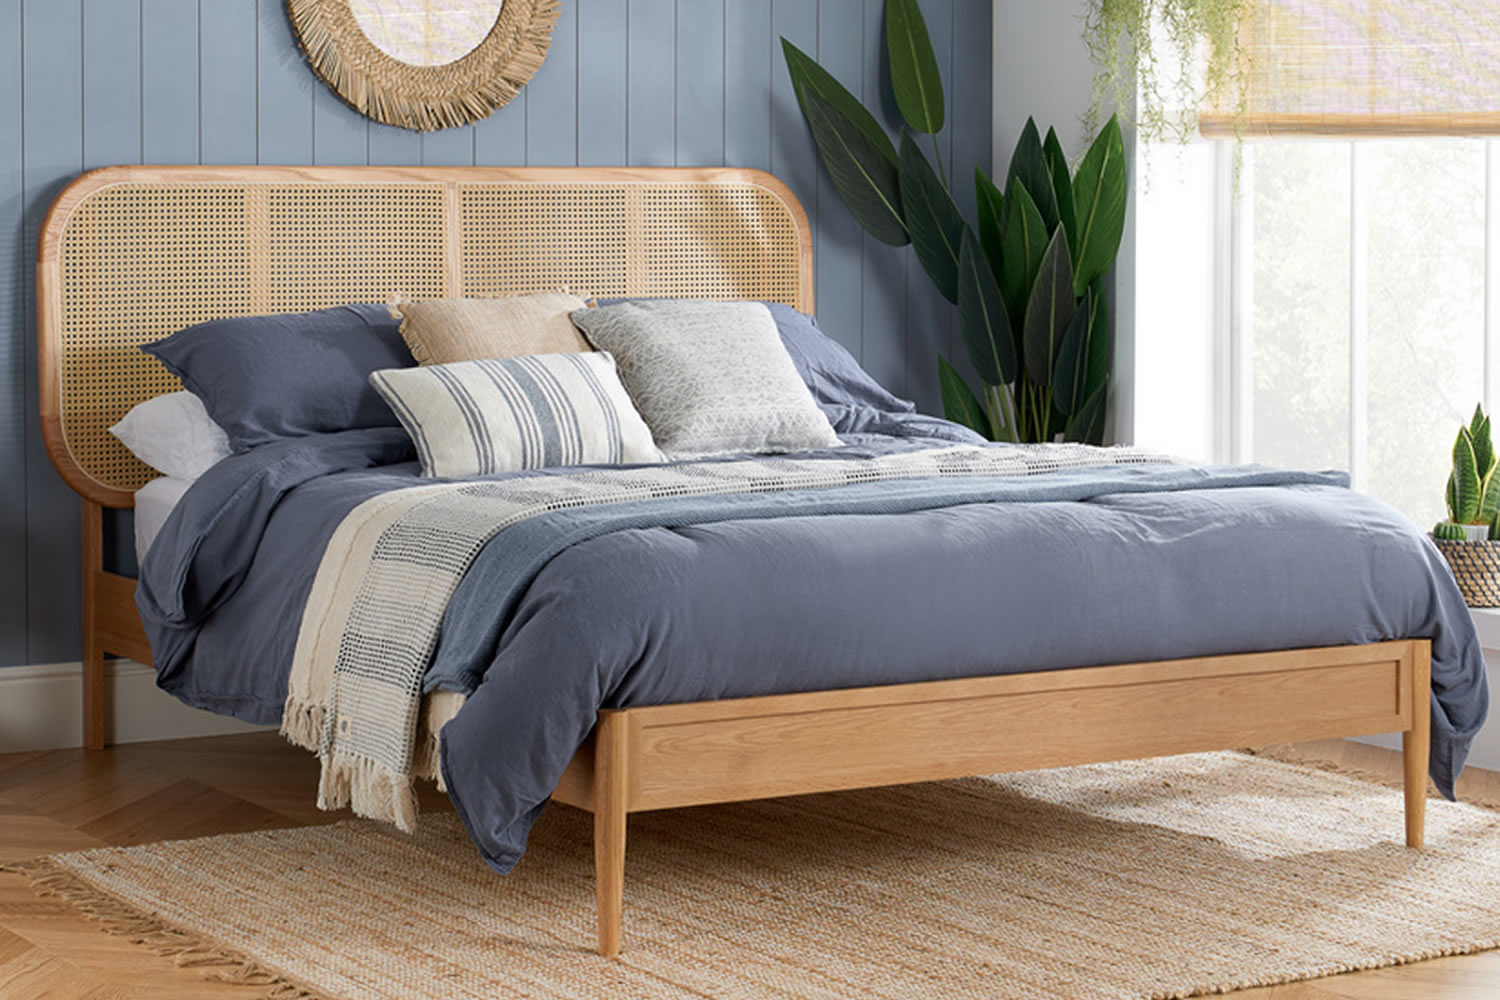 View Elina Wooden Rattan 50 King Size Bed Frame Crafted From Solid Oak Curved Headboard Low Foot End Sturdy Legs Sprung Slatted Base information